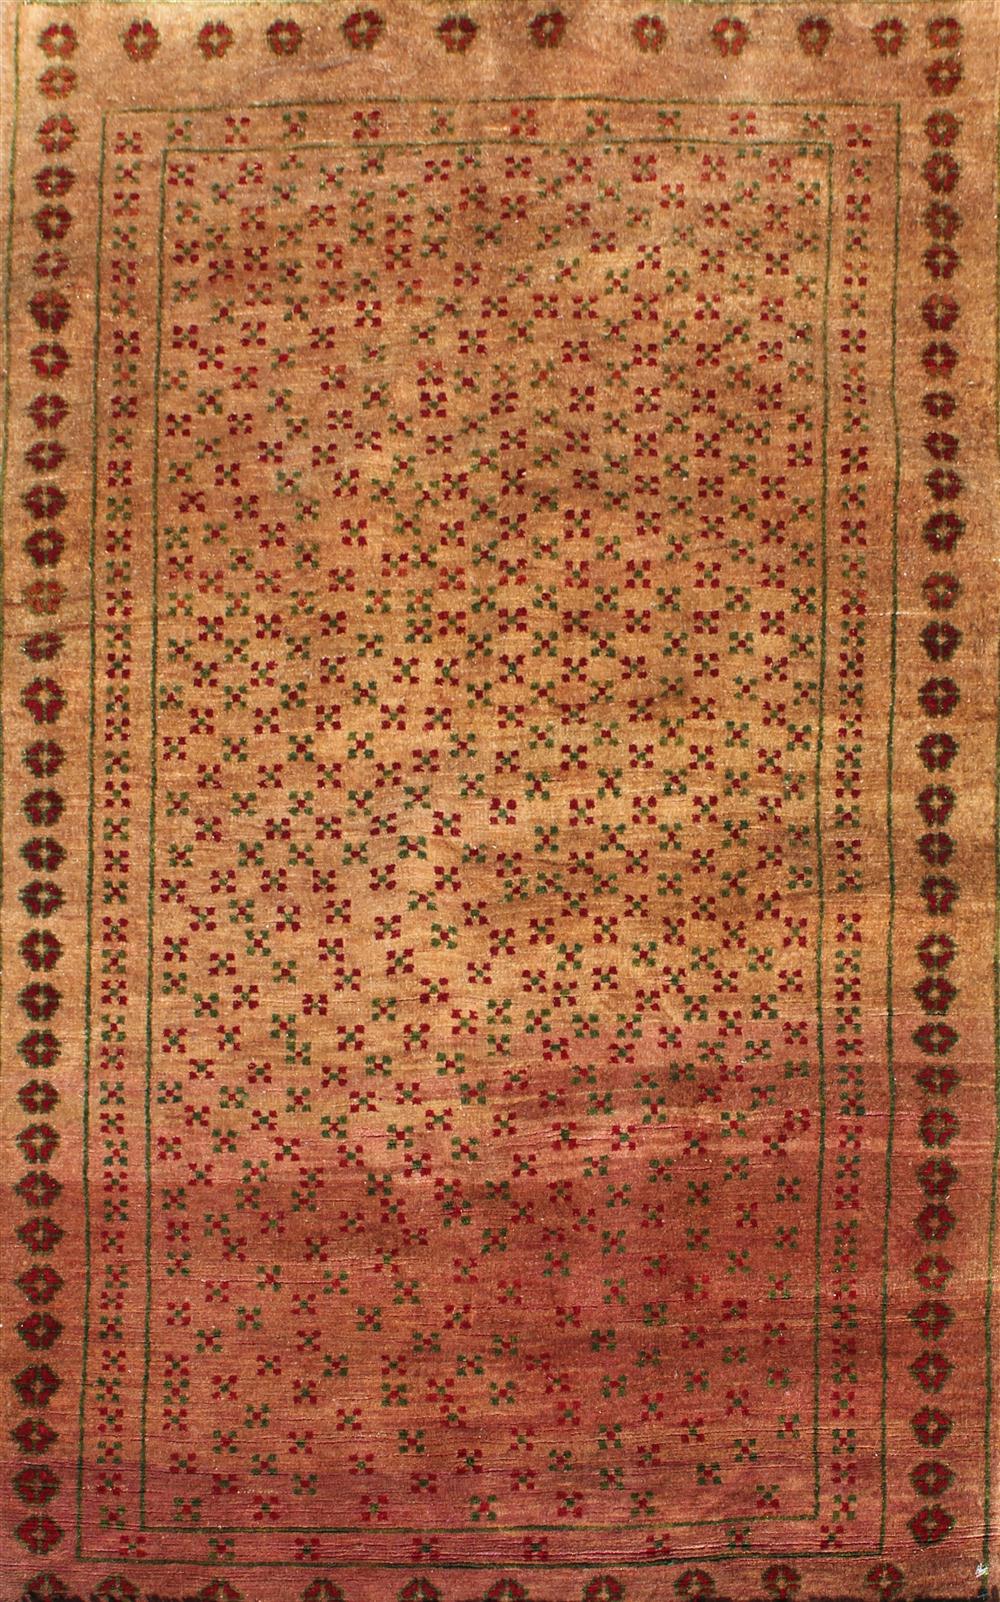 NEW GABEH RUG approx. 5' x 3'3'';